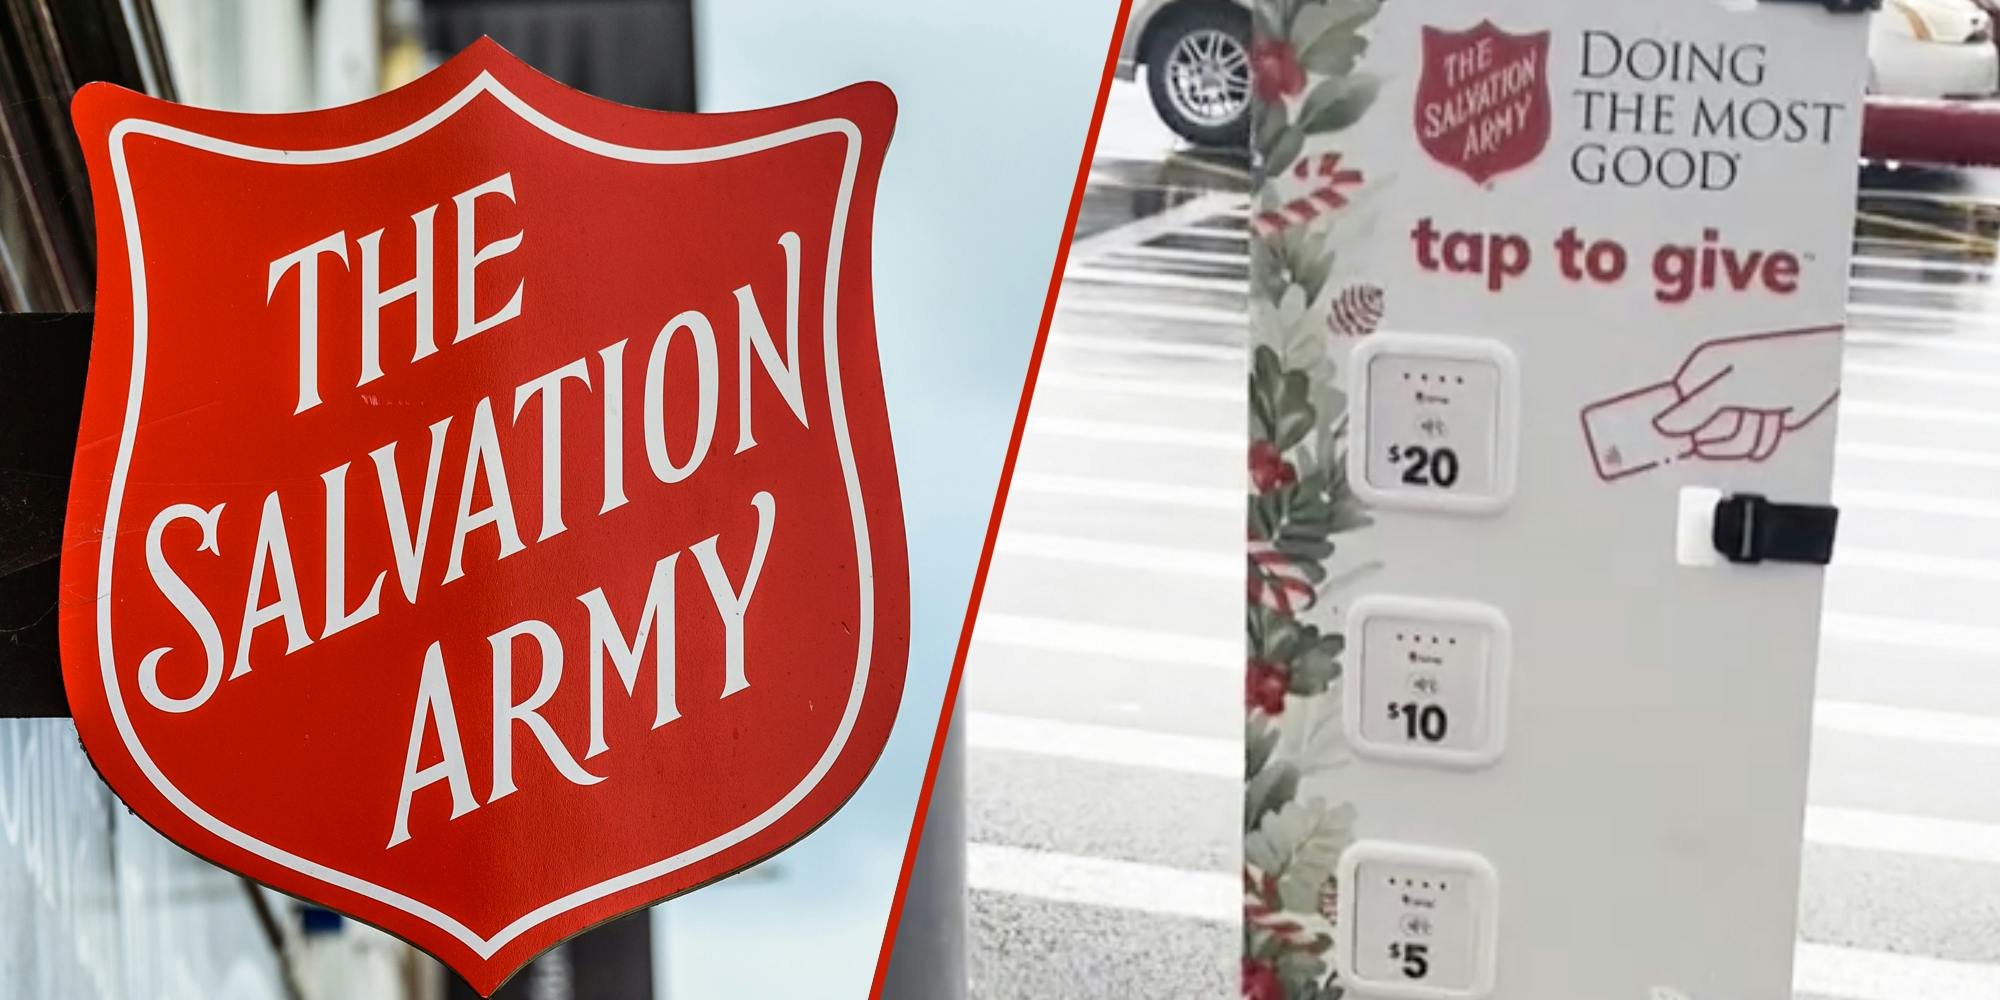 ‘Not even a dollar option?’: Salvation Army now takes Apple Pay with only $5, $10, and $20 donation options for customers who don’t carry cash, angering viewers